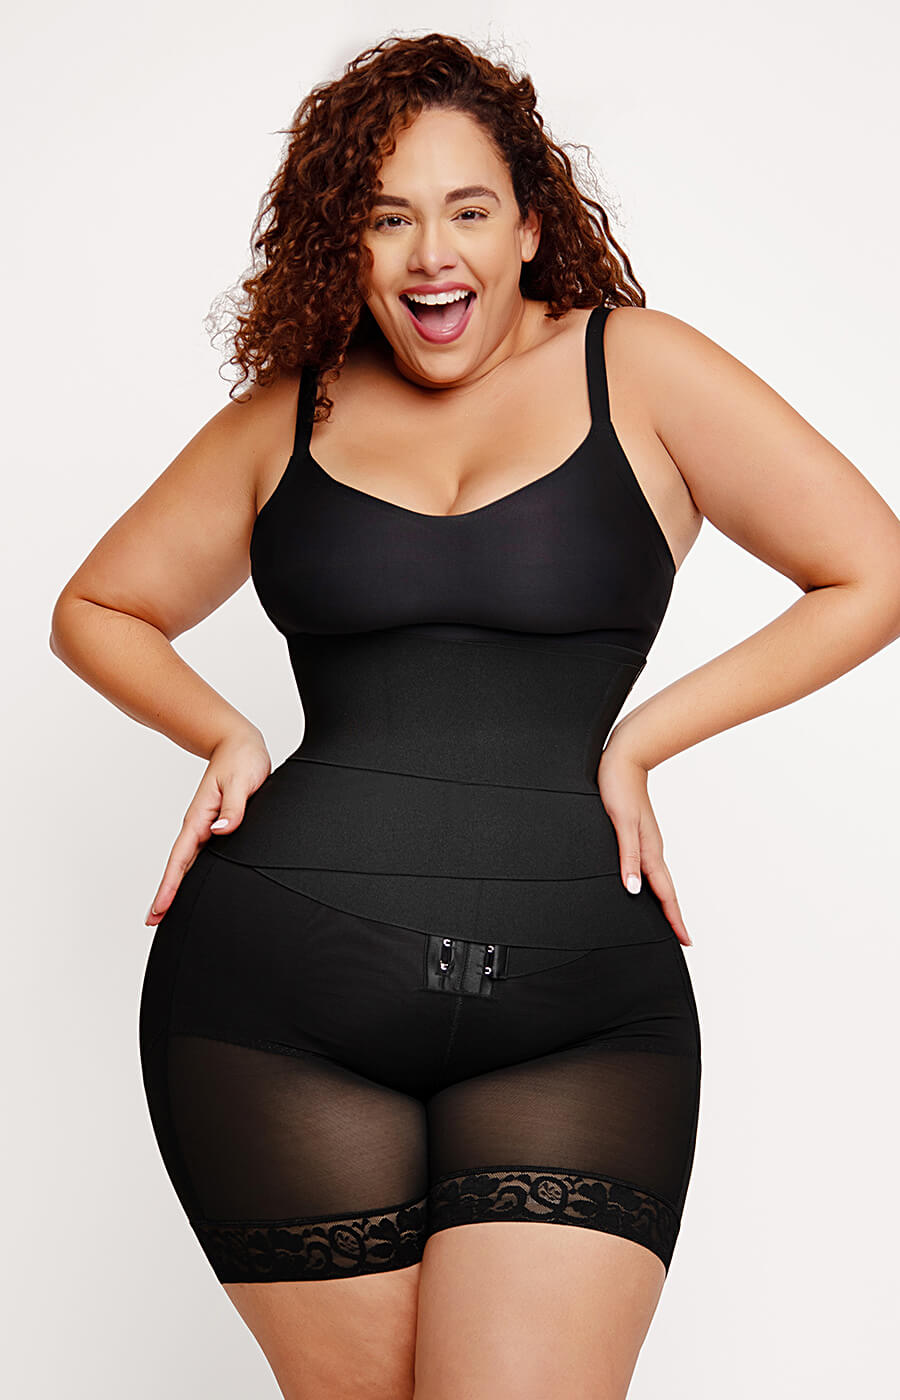 Shapellx Helps Women Embrace Their Body and Confidence